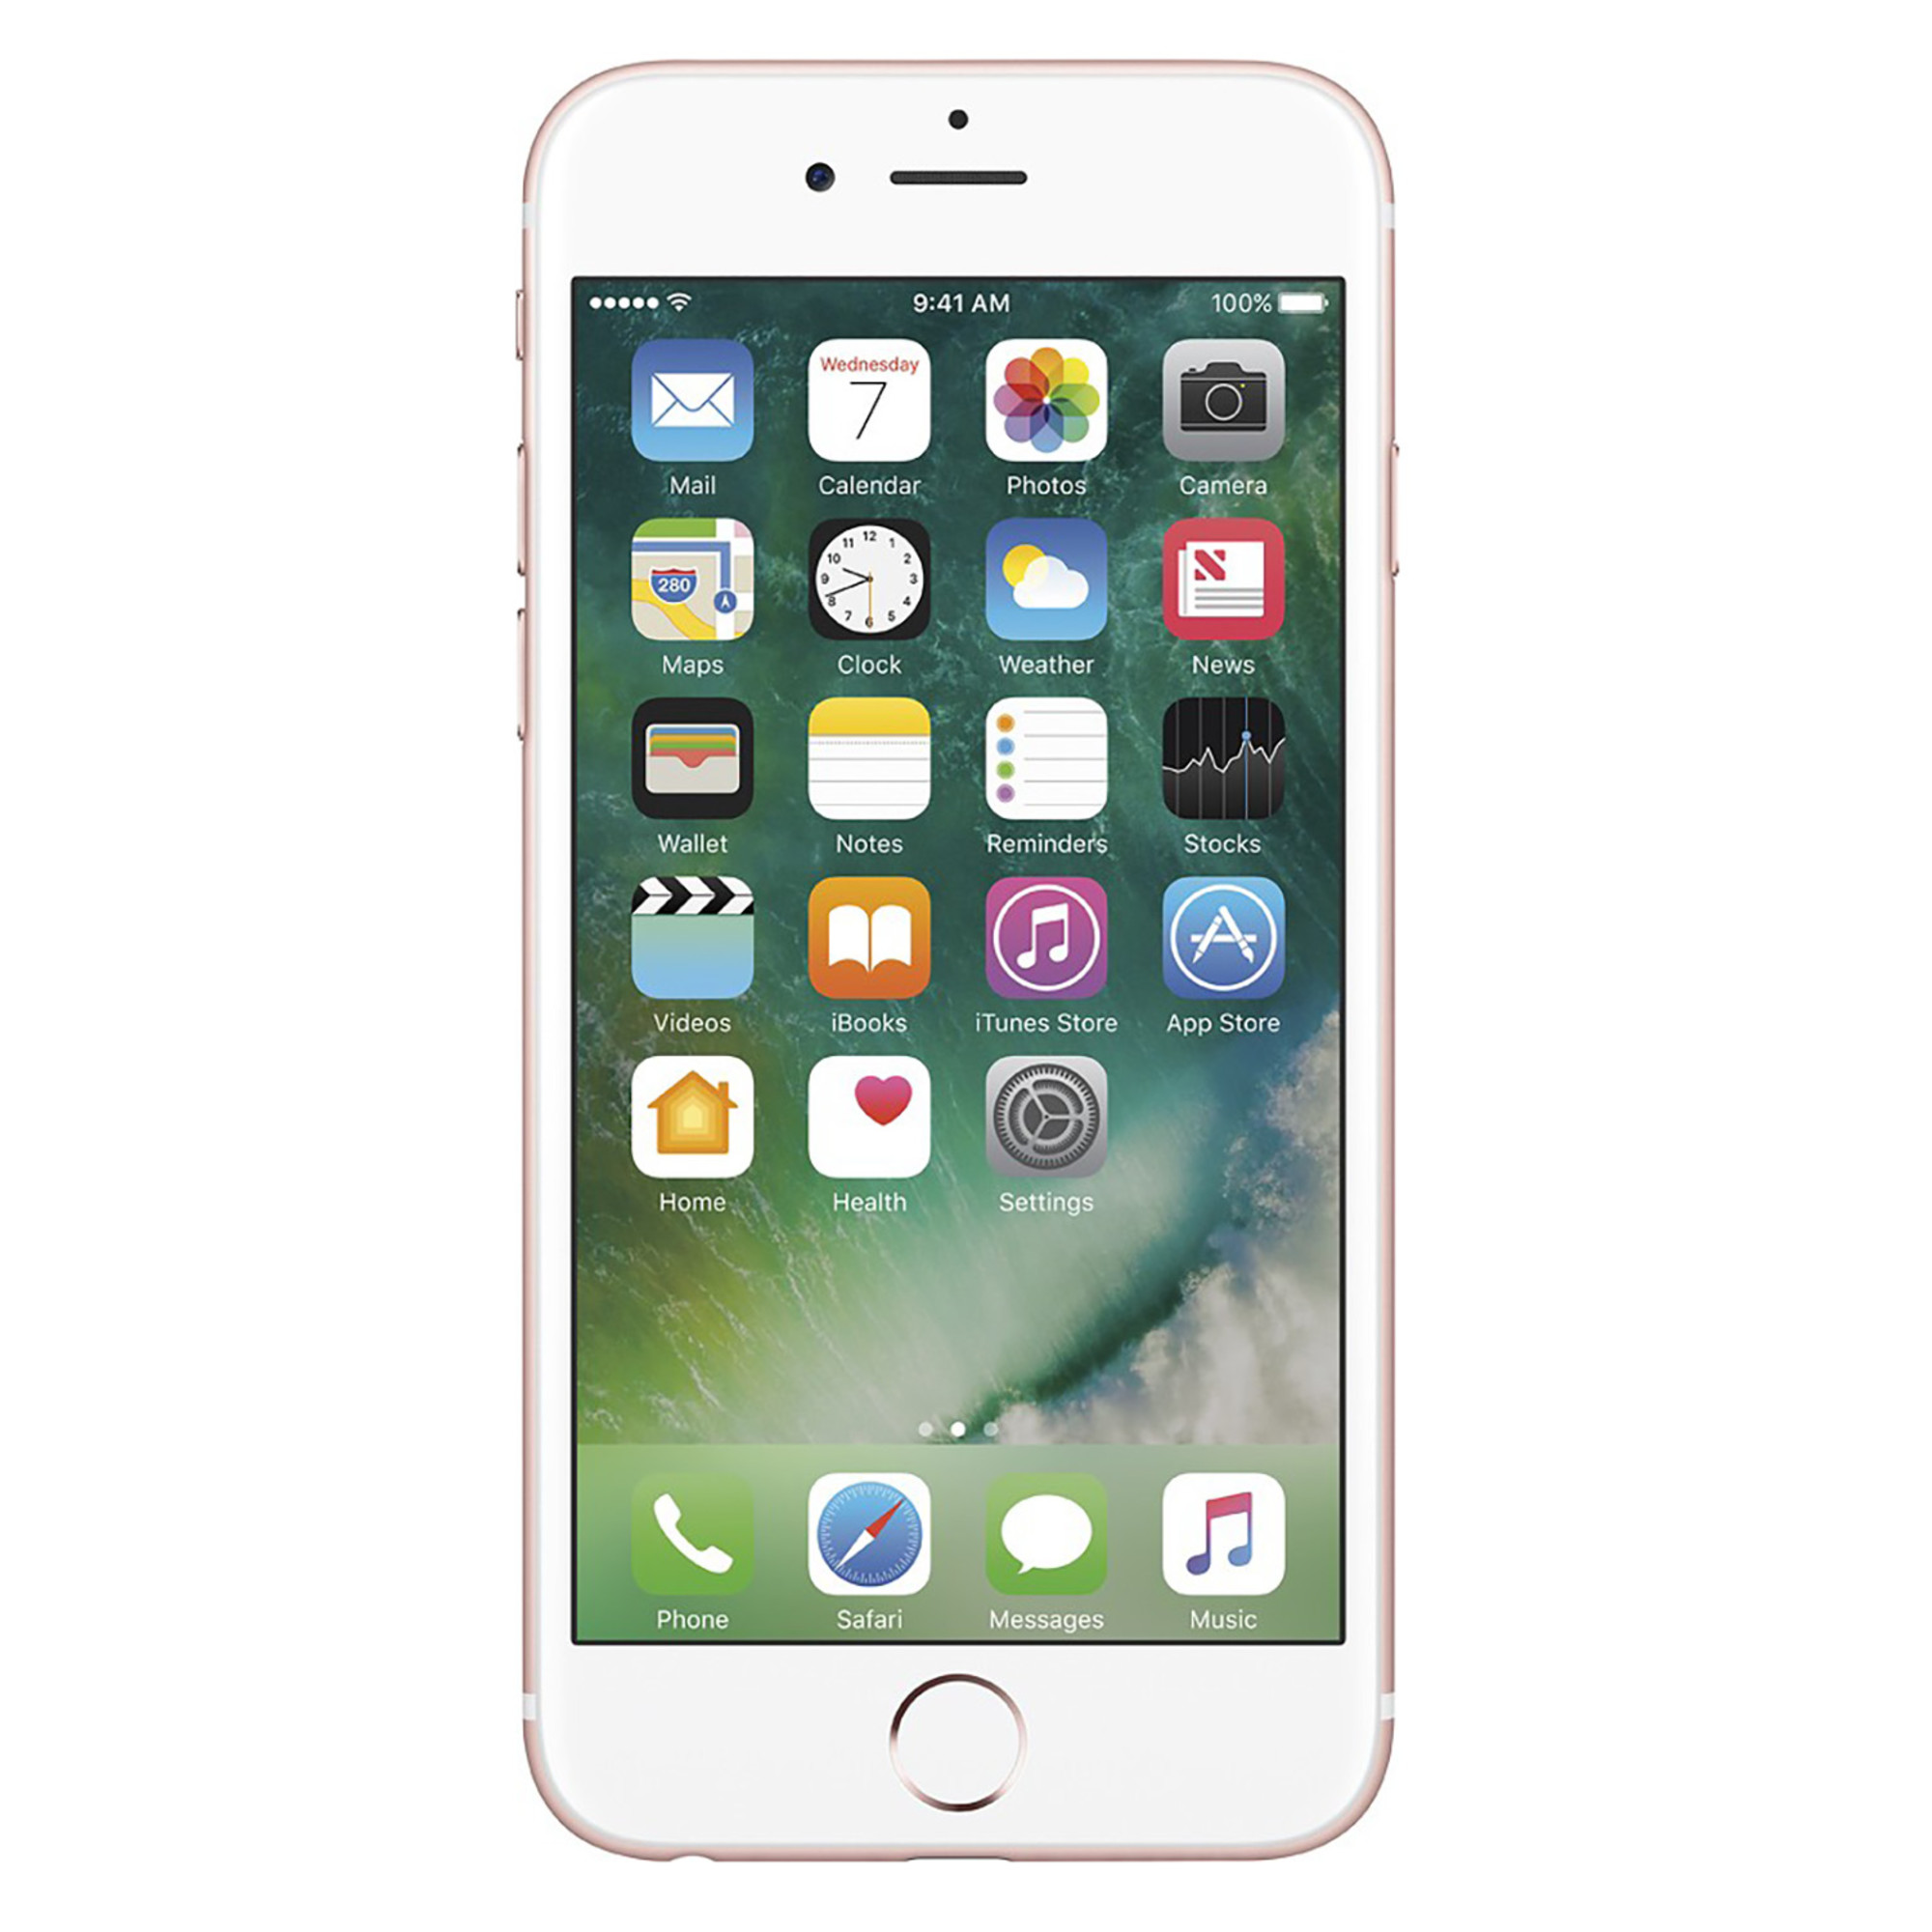 Pre-Owned Apple iPhone 6s 128GB GSM Phone - Rose Gold + WeCare Alcohol Wipes Pack (50 Wipes) (Refurbished: Good) - image 3 of 6